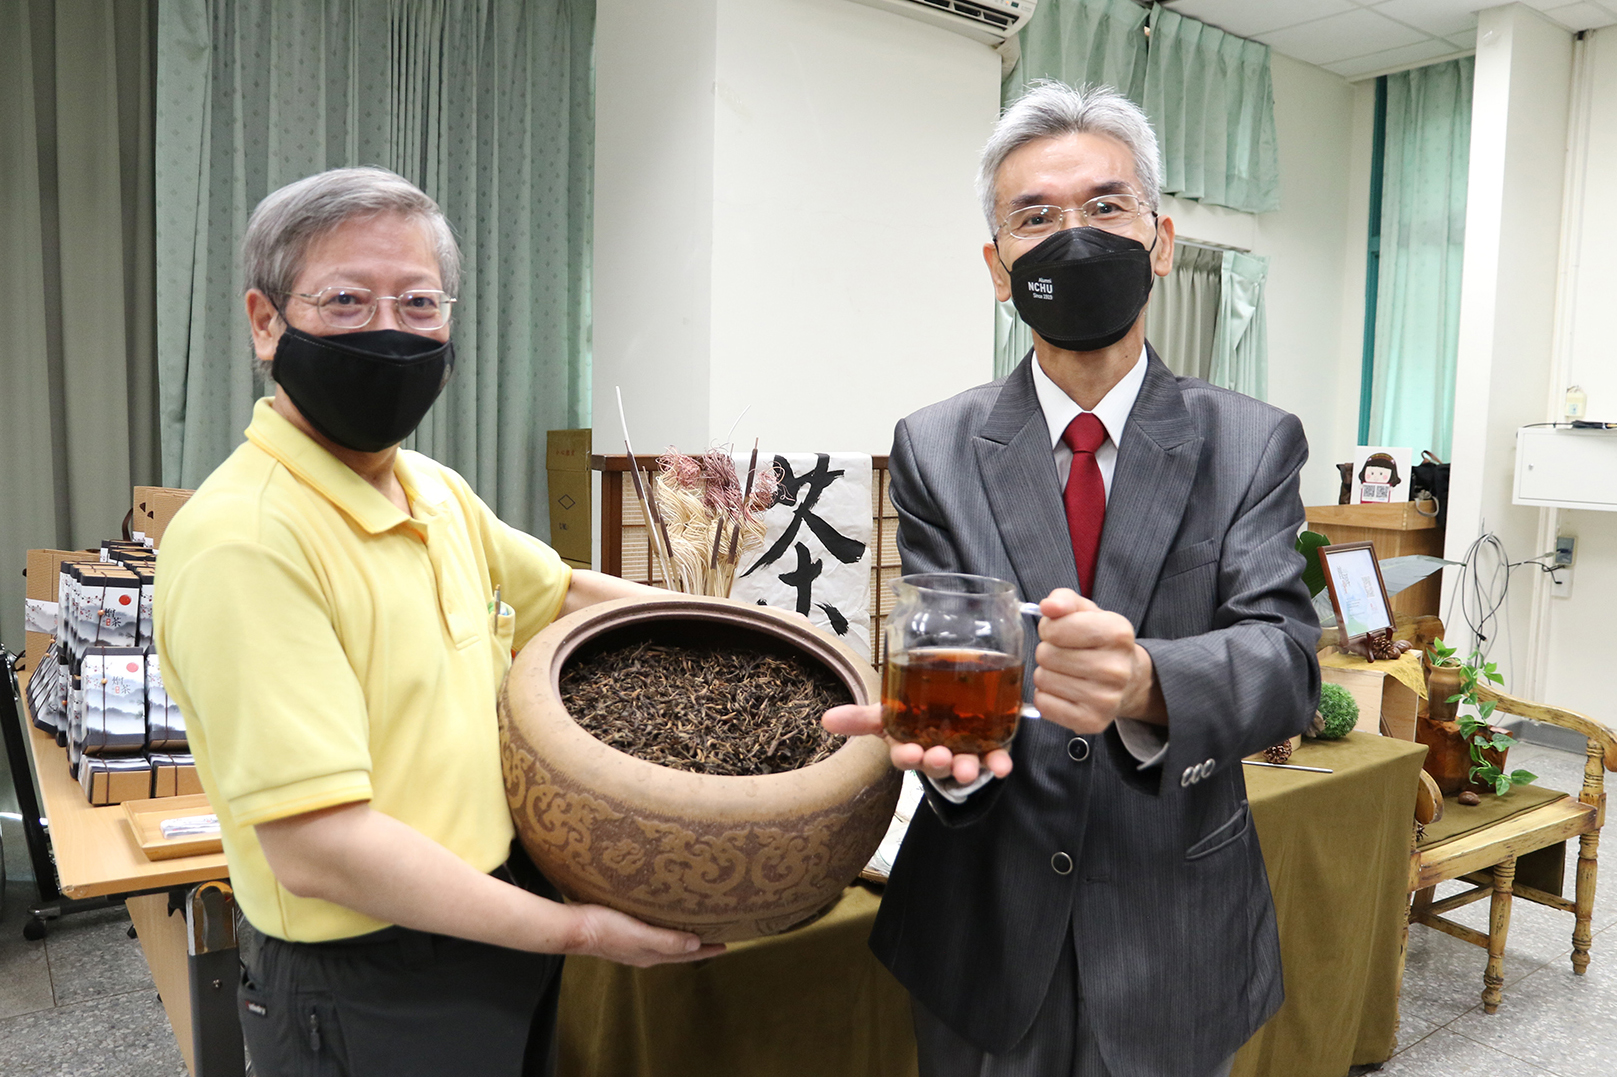 Puerh Tea Liquid Preventing Tooth Decay, Teaghrelin Helping Metabolism and Muscle Growth, National Chung Hsing University Develops Two New Tea Products for the First Time in Taiwan